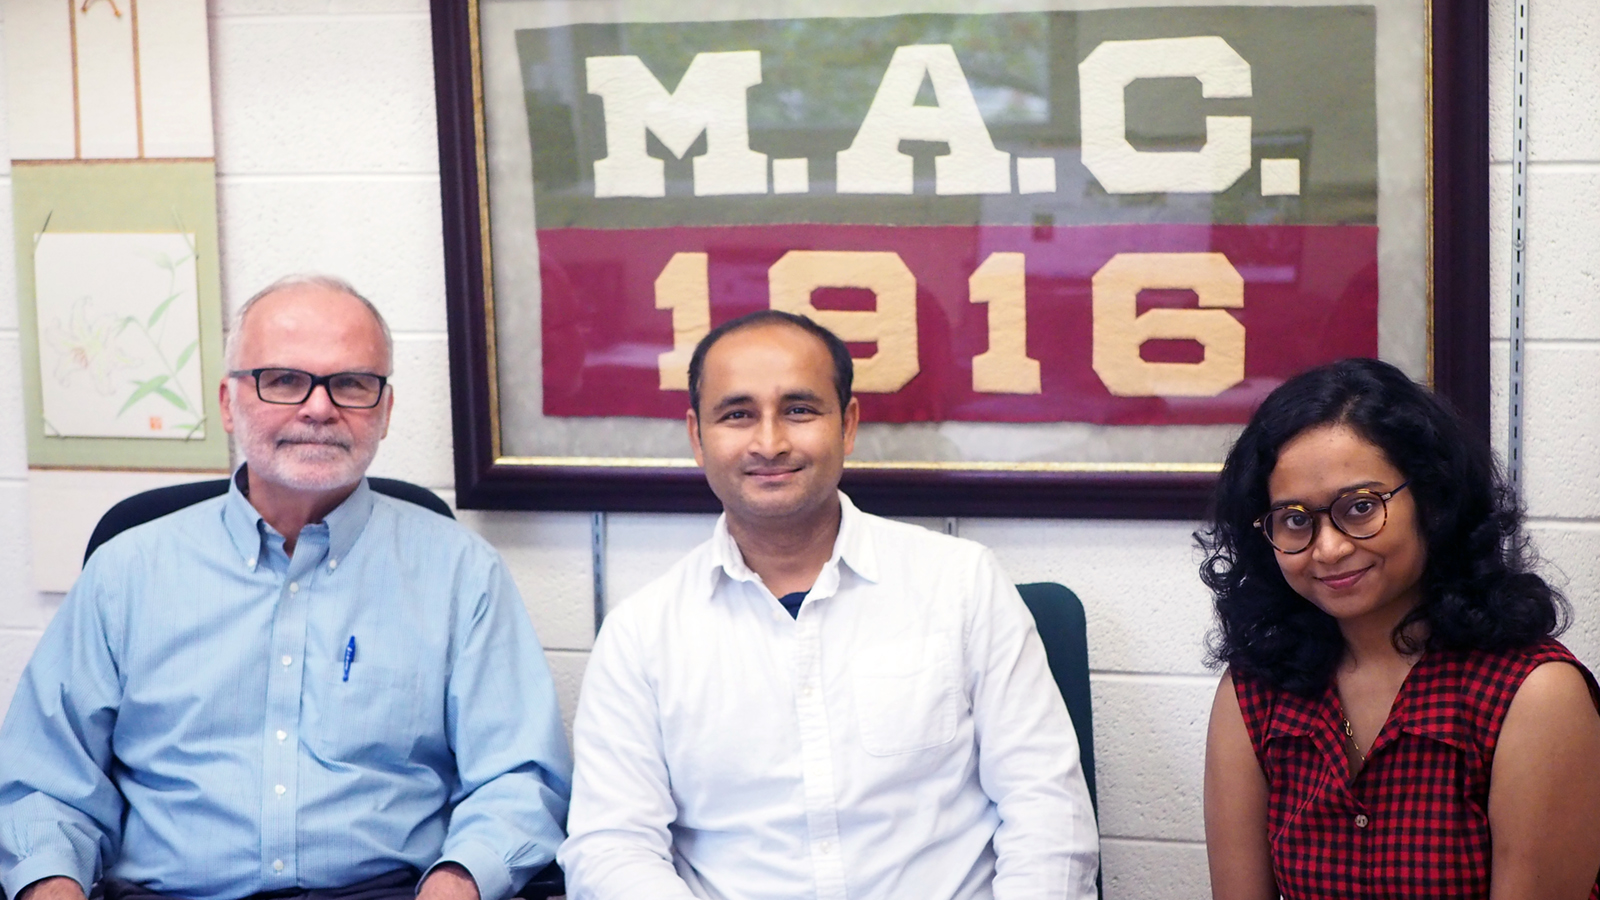 University Distinguished Professor Thomas Sharkey, Assistant Professor Mohammad Mostofa and postdoctoral research associate Abira Sahu (left to right) sit in Sharkey’s office.